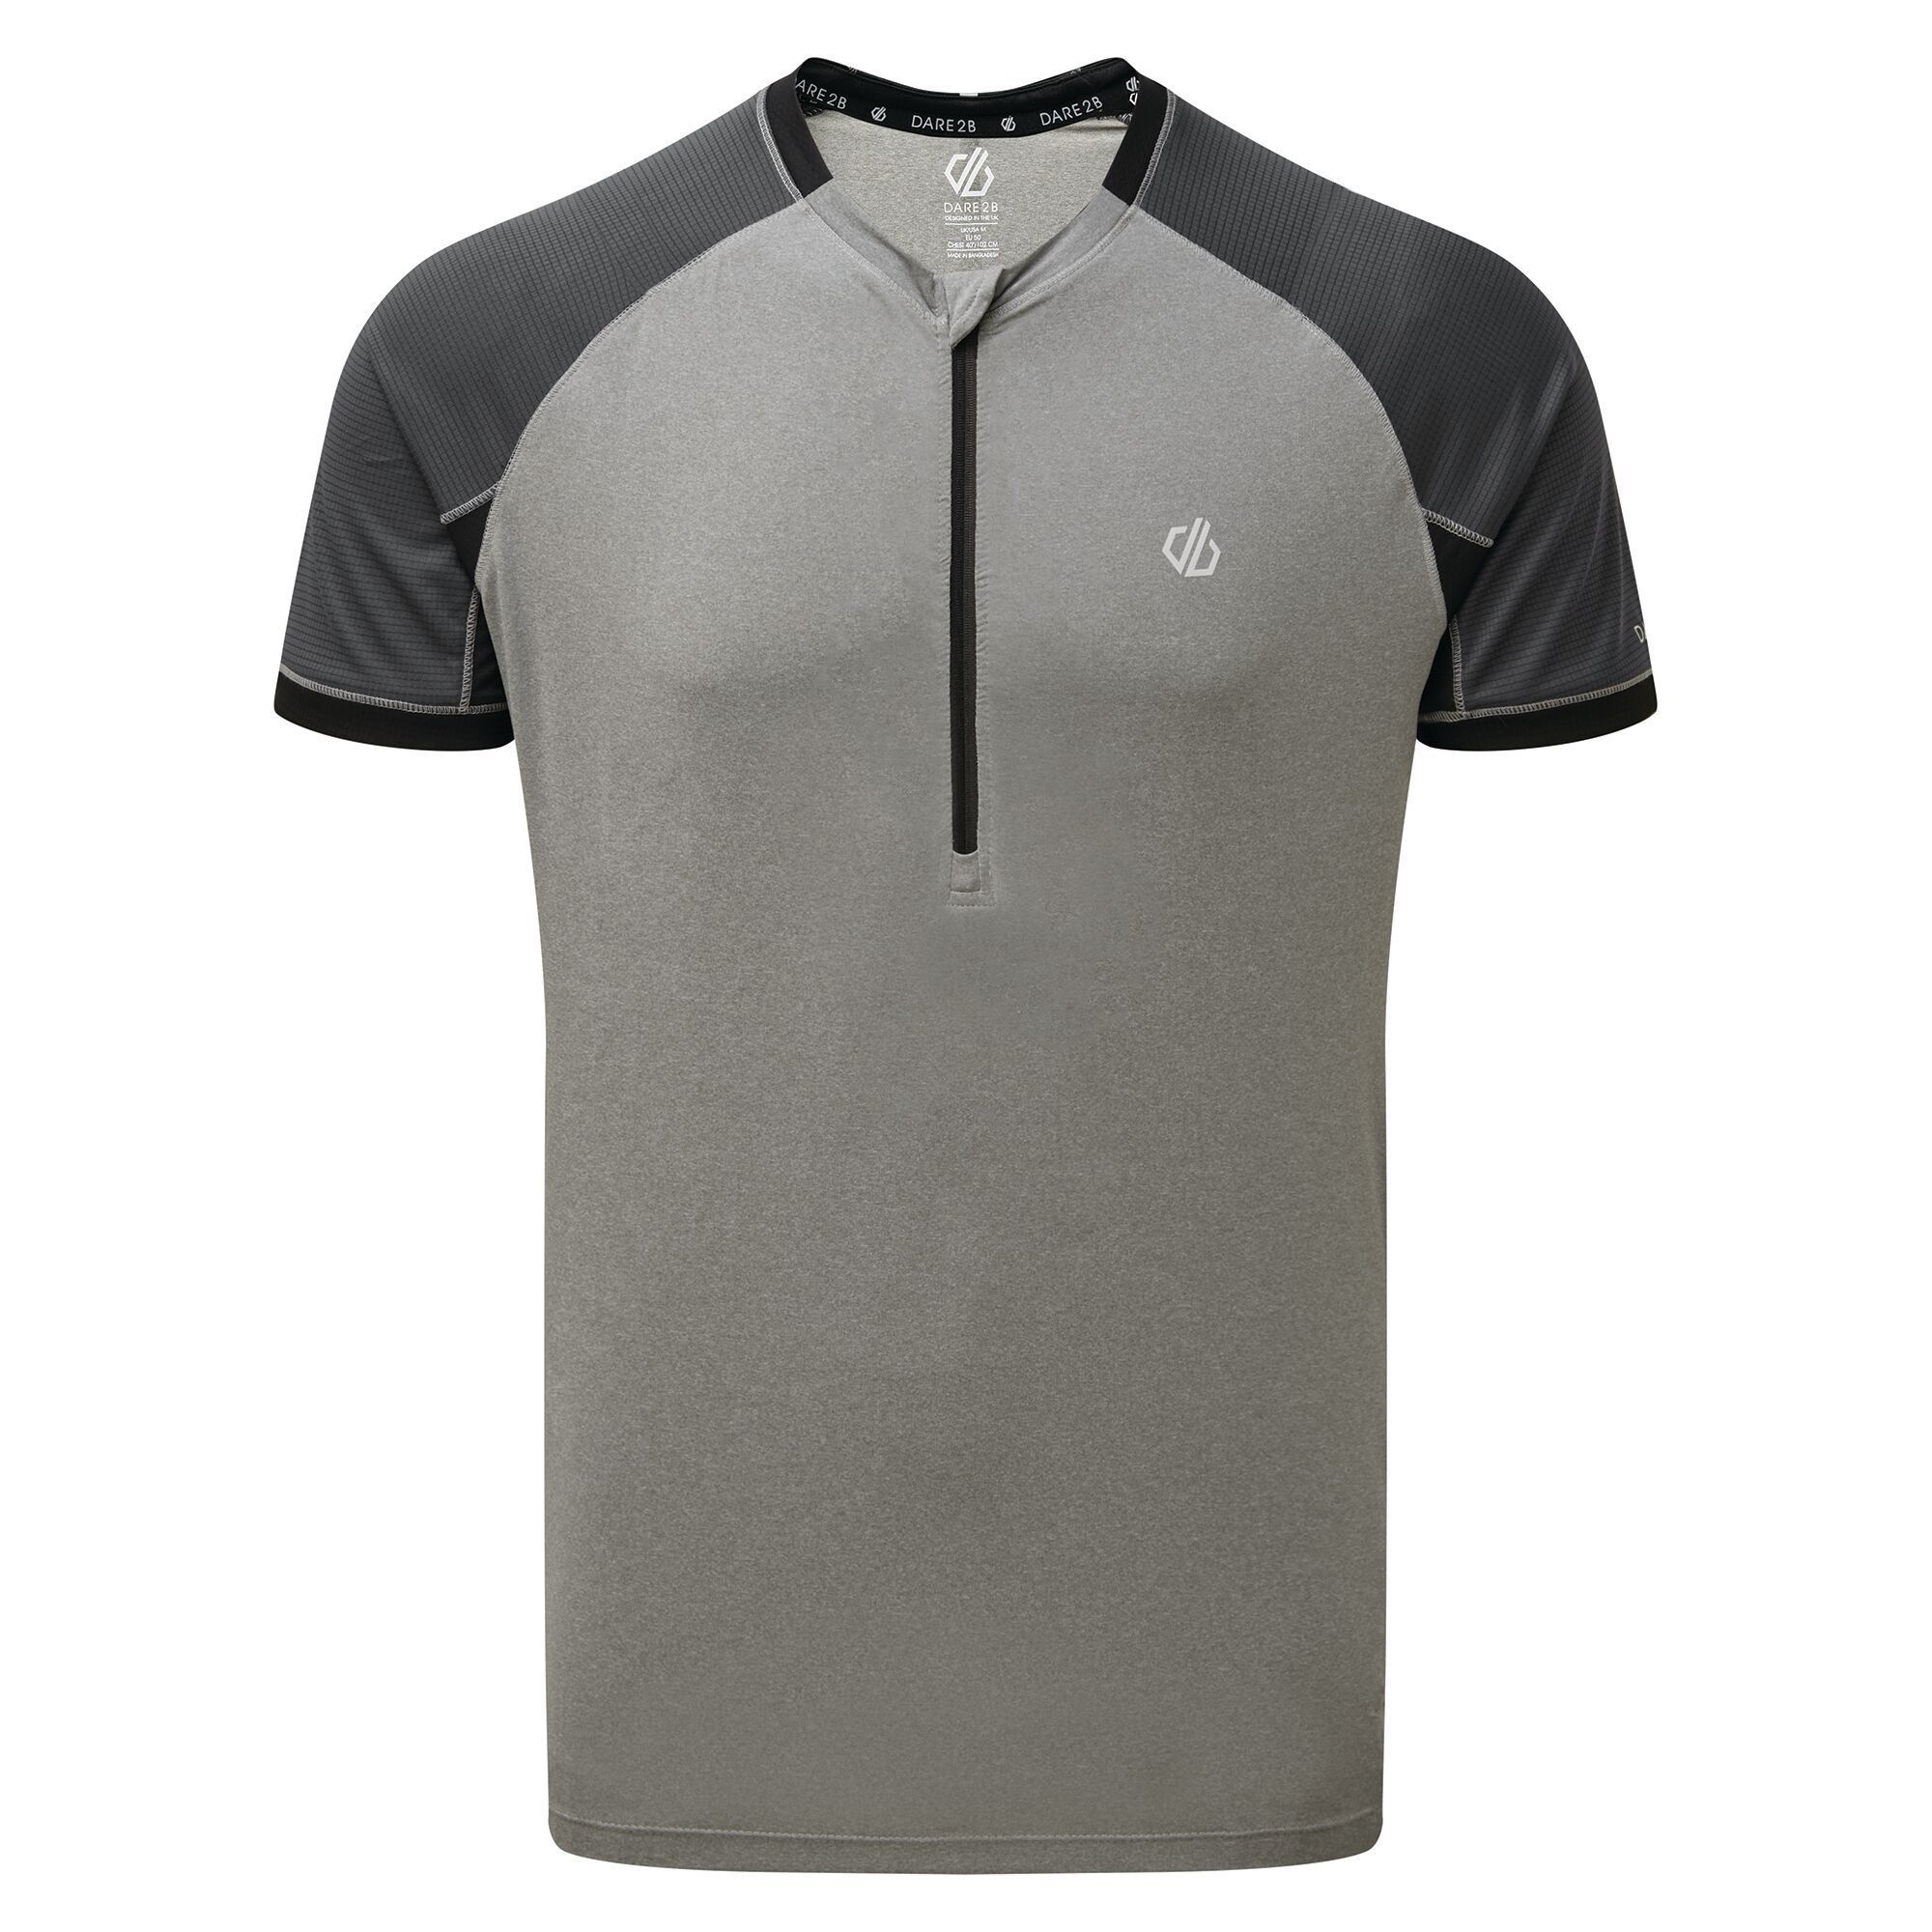 Material: 100% Polyester (Q-Wic Plus lightweight polyester fabric). Lightweight and breathable cycle jersey with airflow mesh. Built-in anti-bacterial odour control. 1/2 length centre front venting zip with auto-lock slider and inner zip guard. 1 security pocket with invisible zip. Reflective Dare 2B logo print detail.